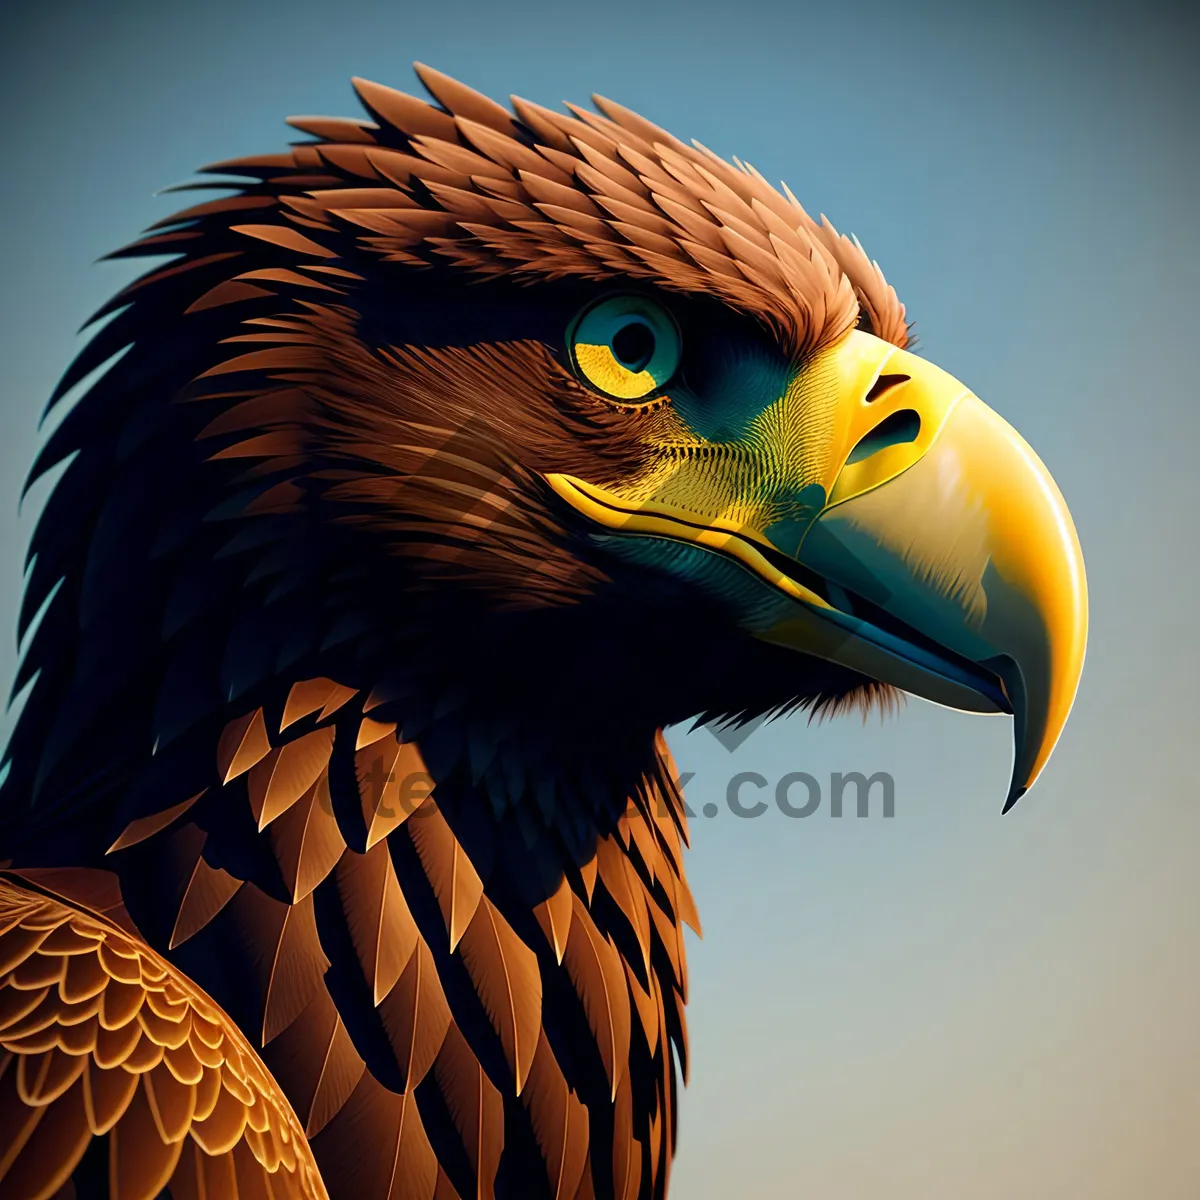 Picture of Colorful Avian Headshot with Vibrant Feathers